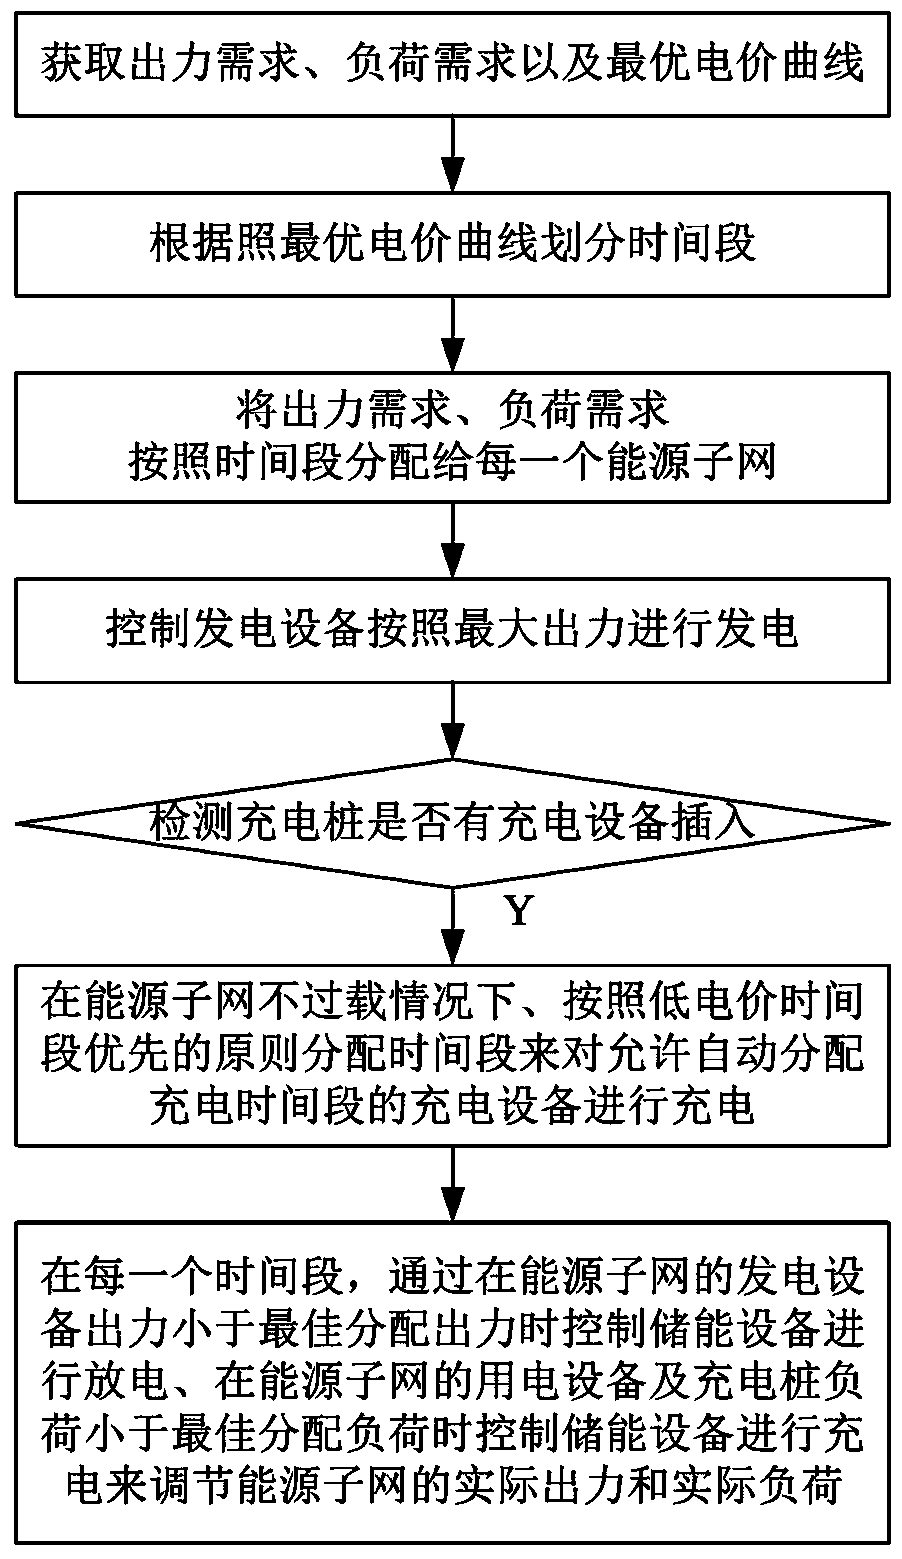 A distributed energy cloud networking intelligent control method and system